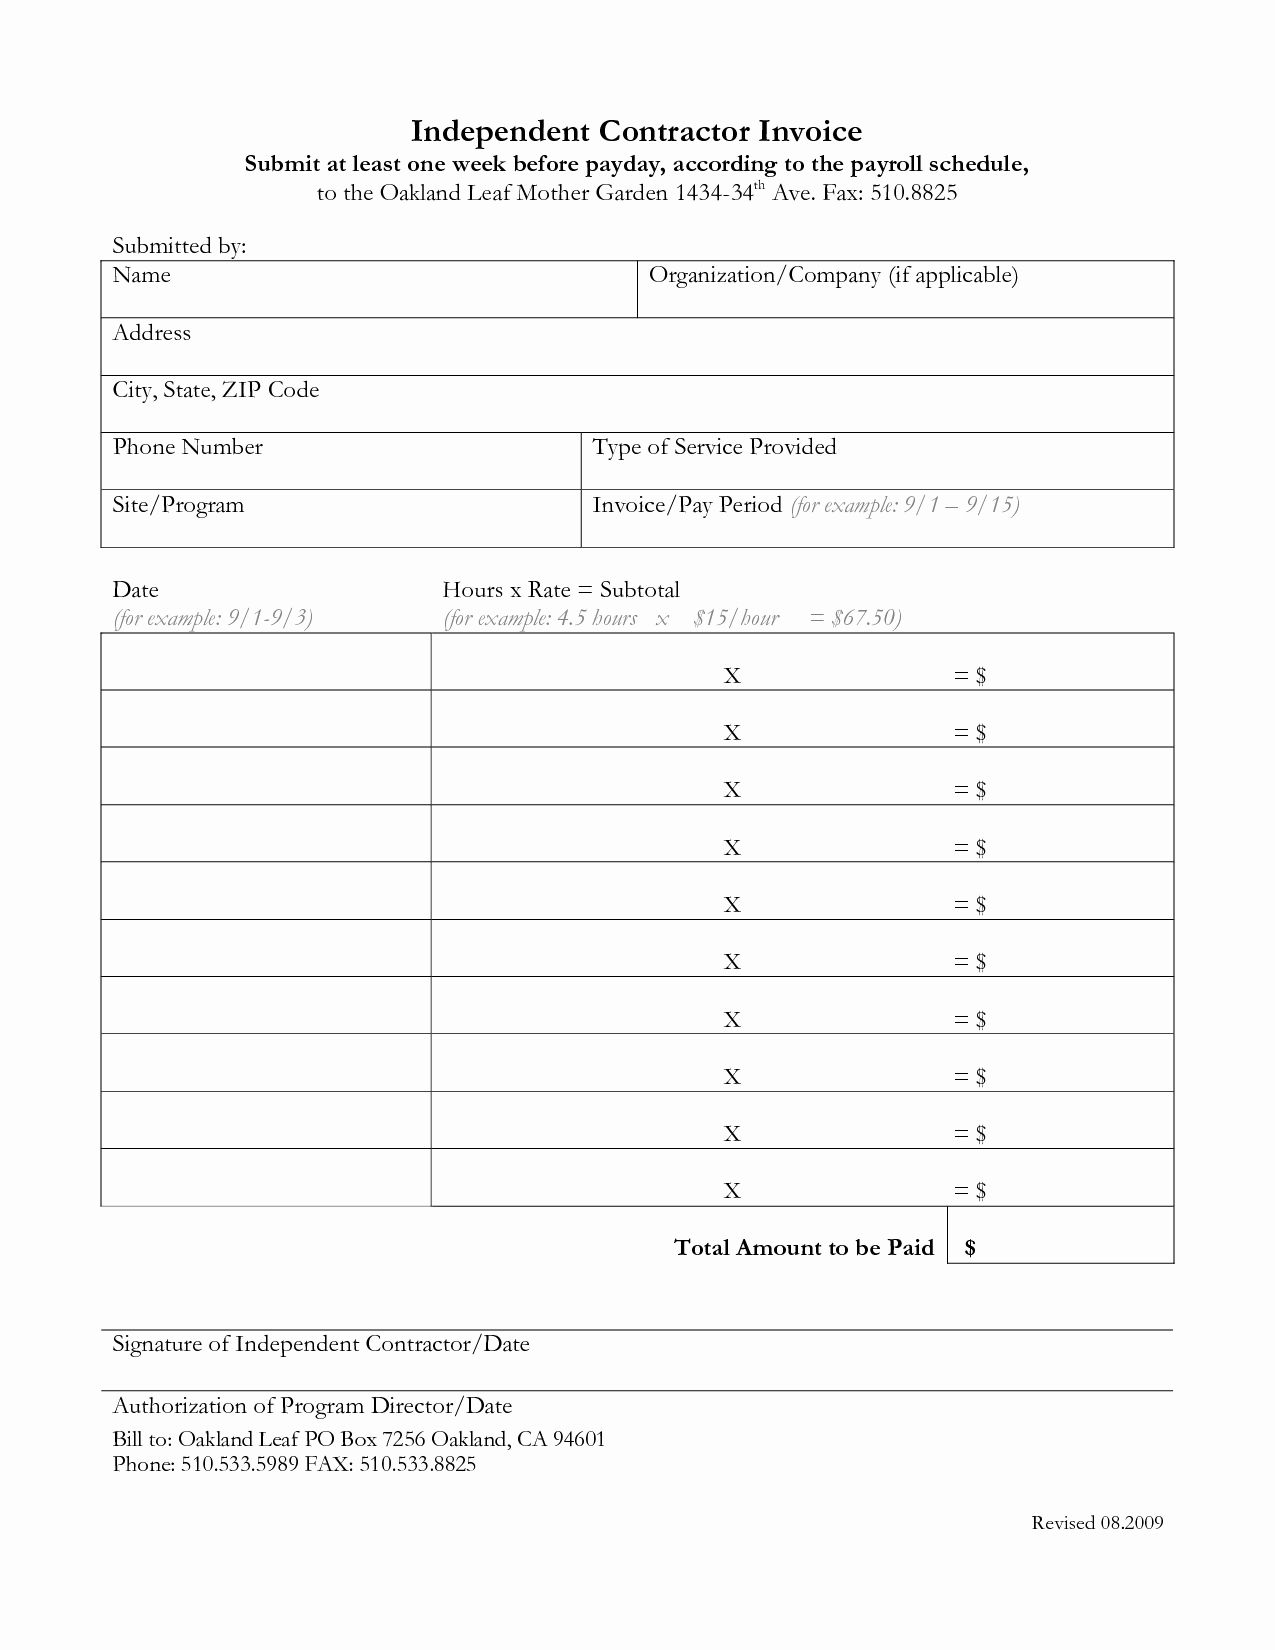 Independent Contractor Invoice Template Excel Beautiful Independent Contractor Invoice Template Free